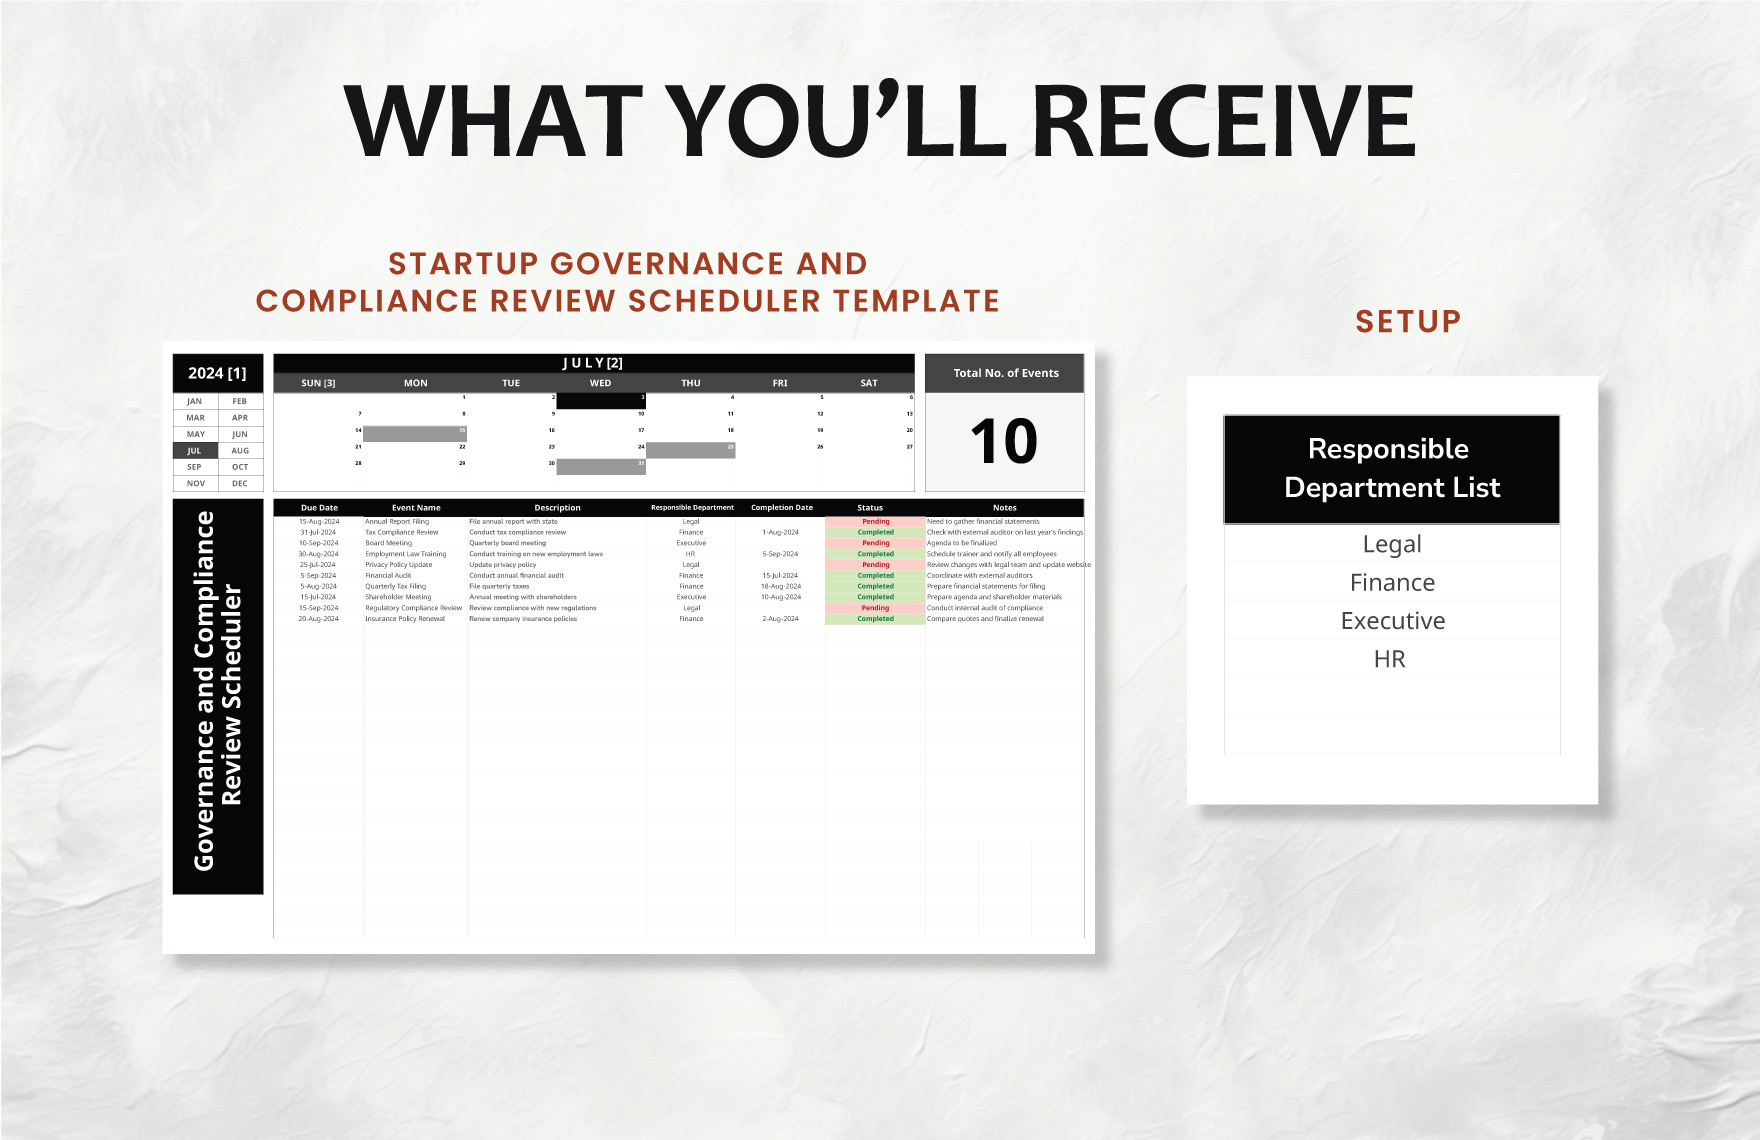 Startup Governance and Compliance Review Scheduler Template